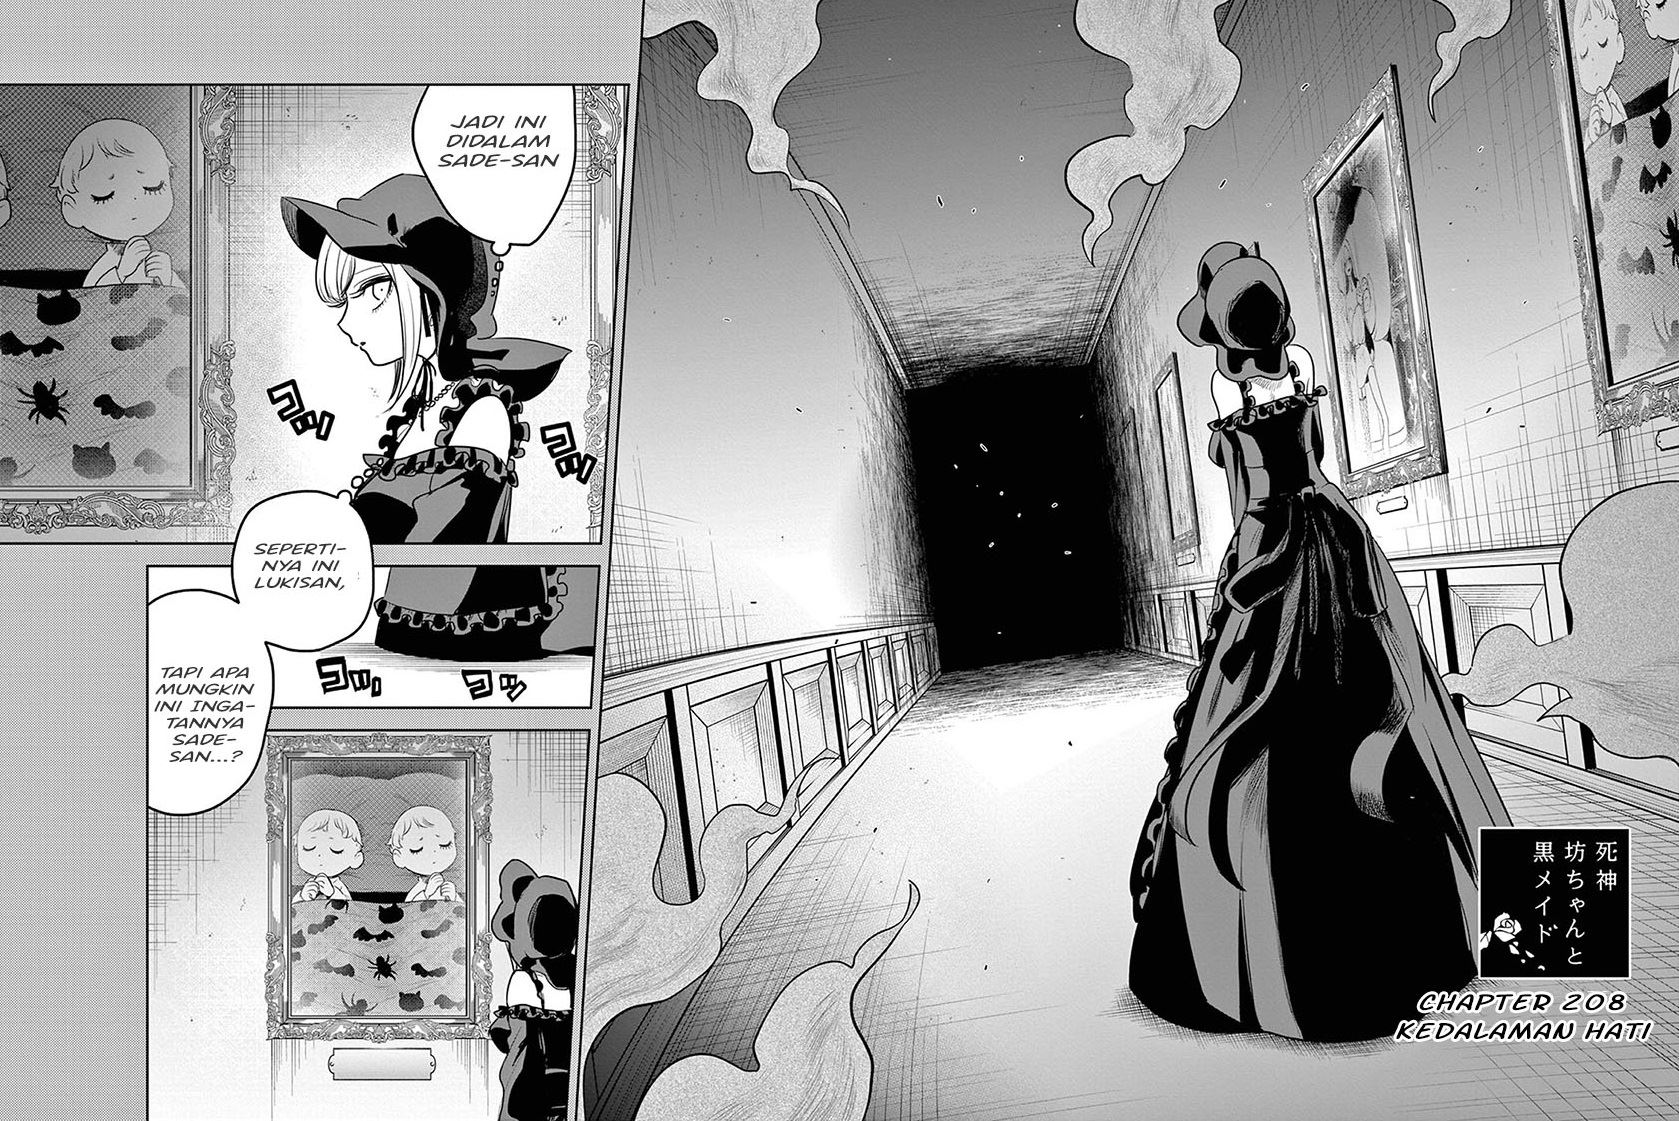 The Duke of Death and His Black Maid Chapter 208